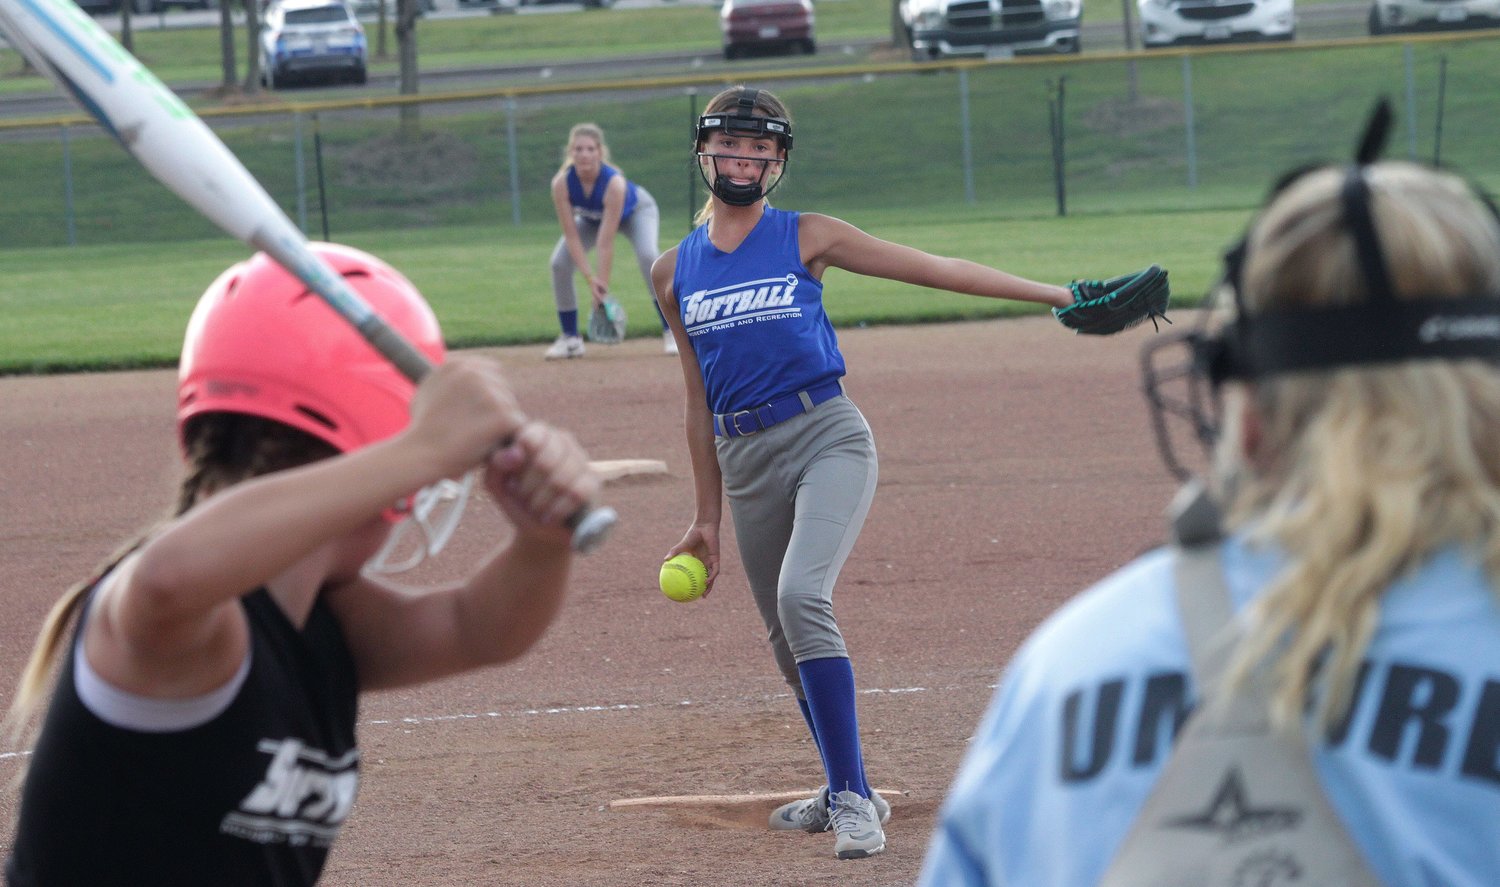 Brynn Goings of Moberly age 12U girls softball team delivers a pitch Wednesday during a Moberly Parks &amp; Recreation Department rec league game played at the Howard Hils Athletic Complex. Moberly defeated Centralia 8-6 in three innings.